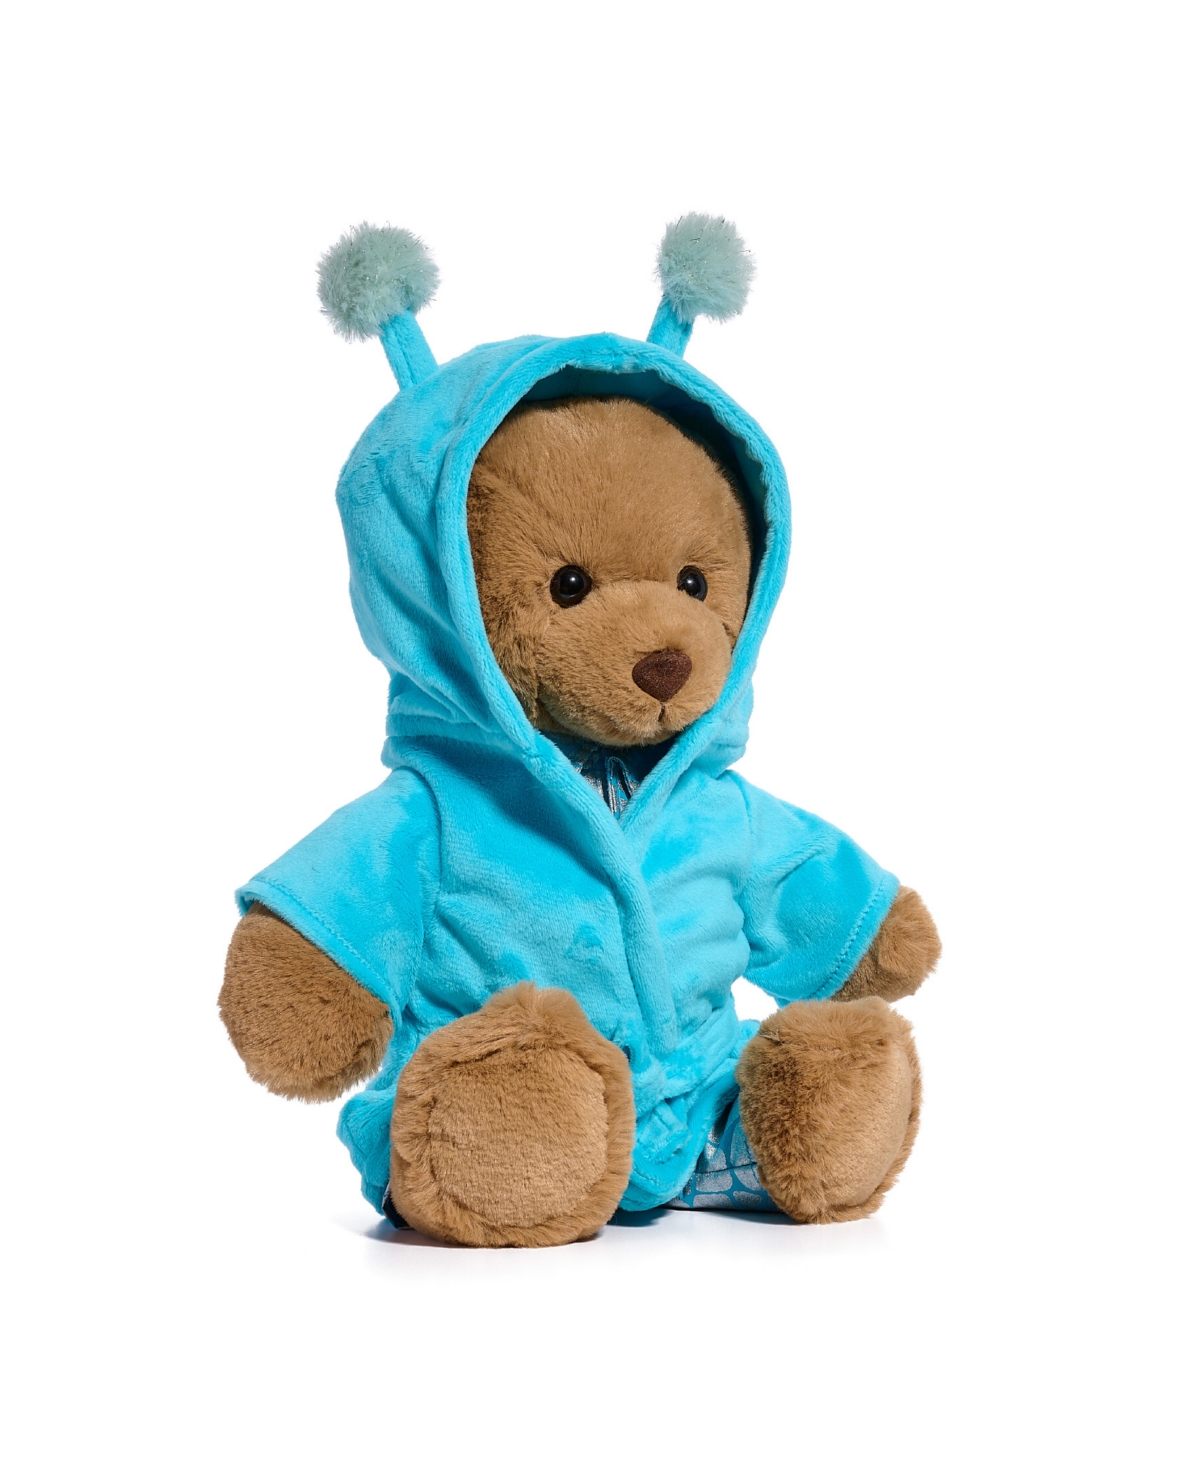 Geoffrey's Toy Box Kids' 9.5" Toy Plush Teddy Bear With Robe, Created For Macys In Pastel Blue